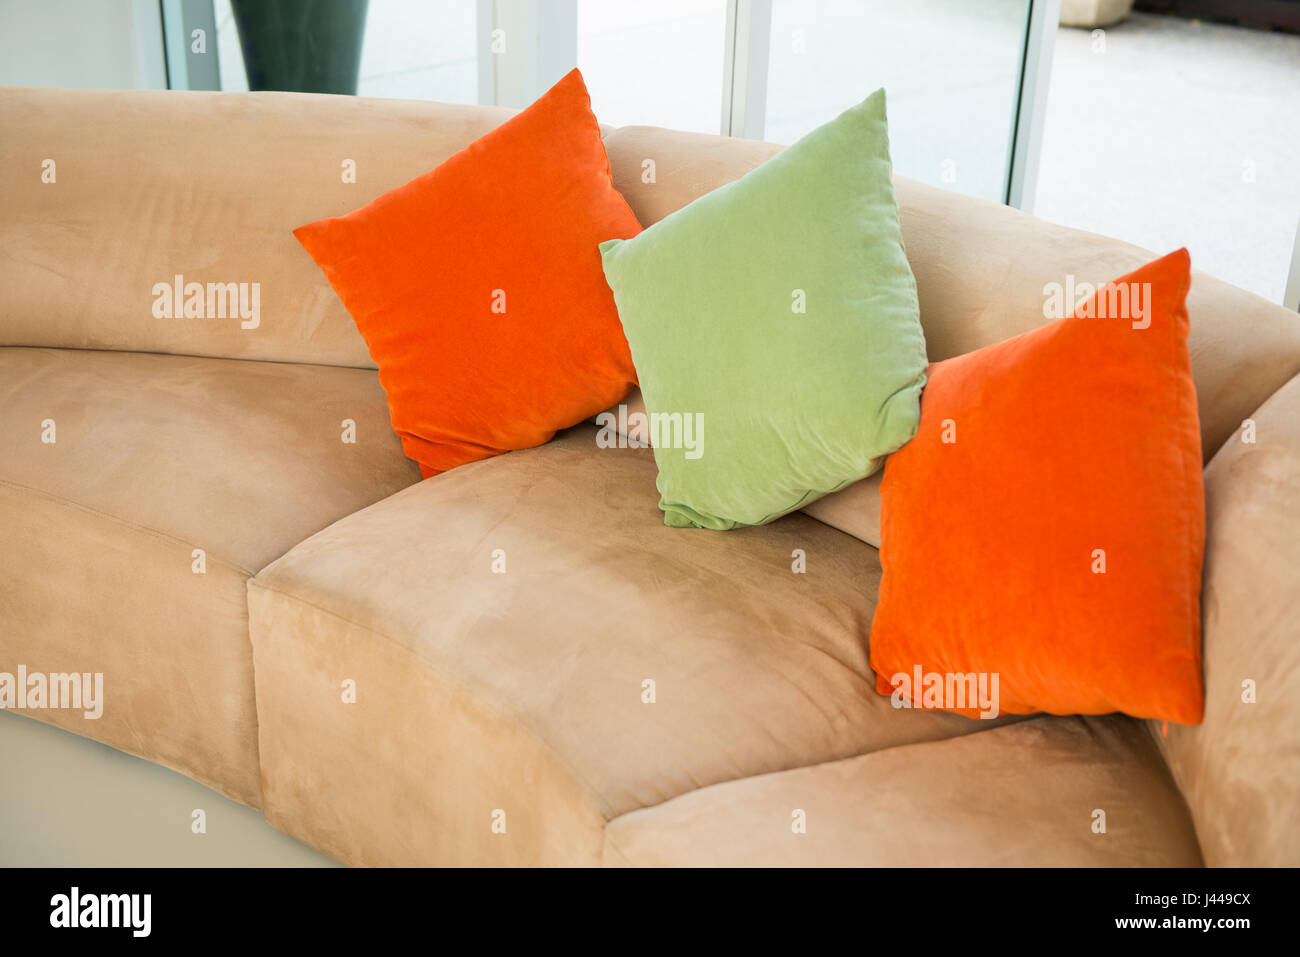 https://c8.alamy.com/comp/J449CX/sofa-with-colorful-pillows-in-the-living-room-J449CX.jpg